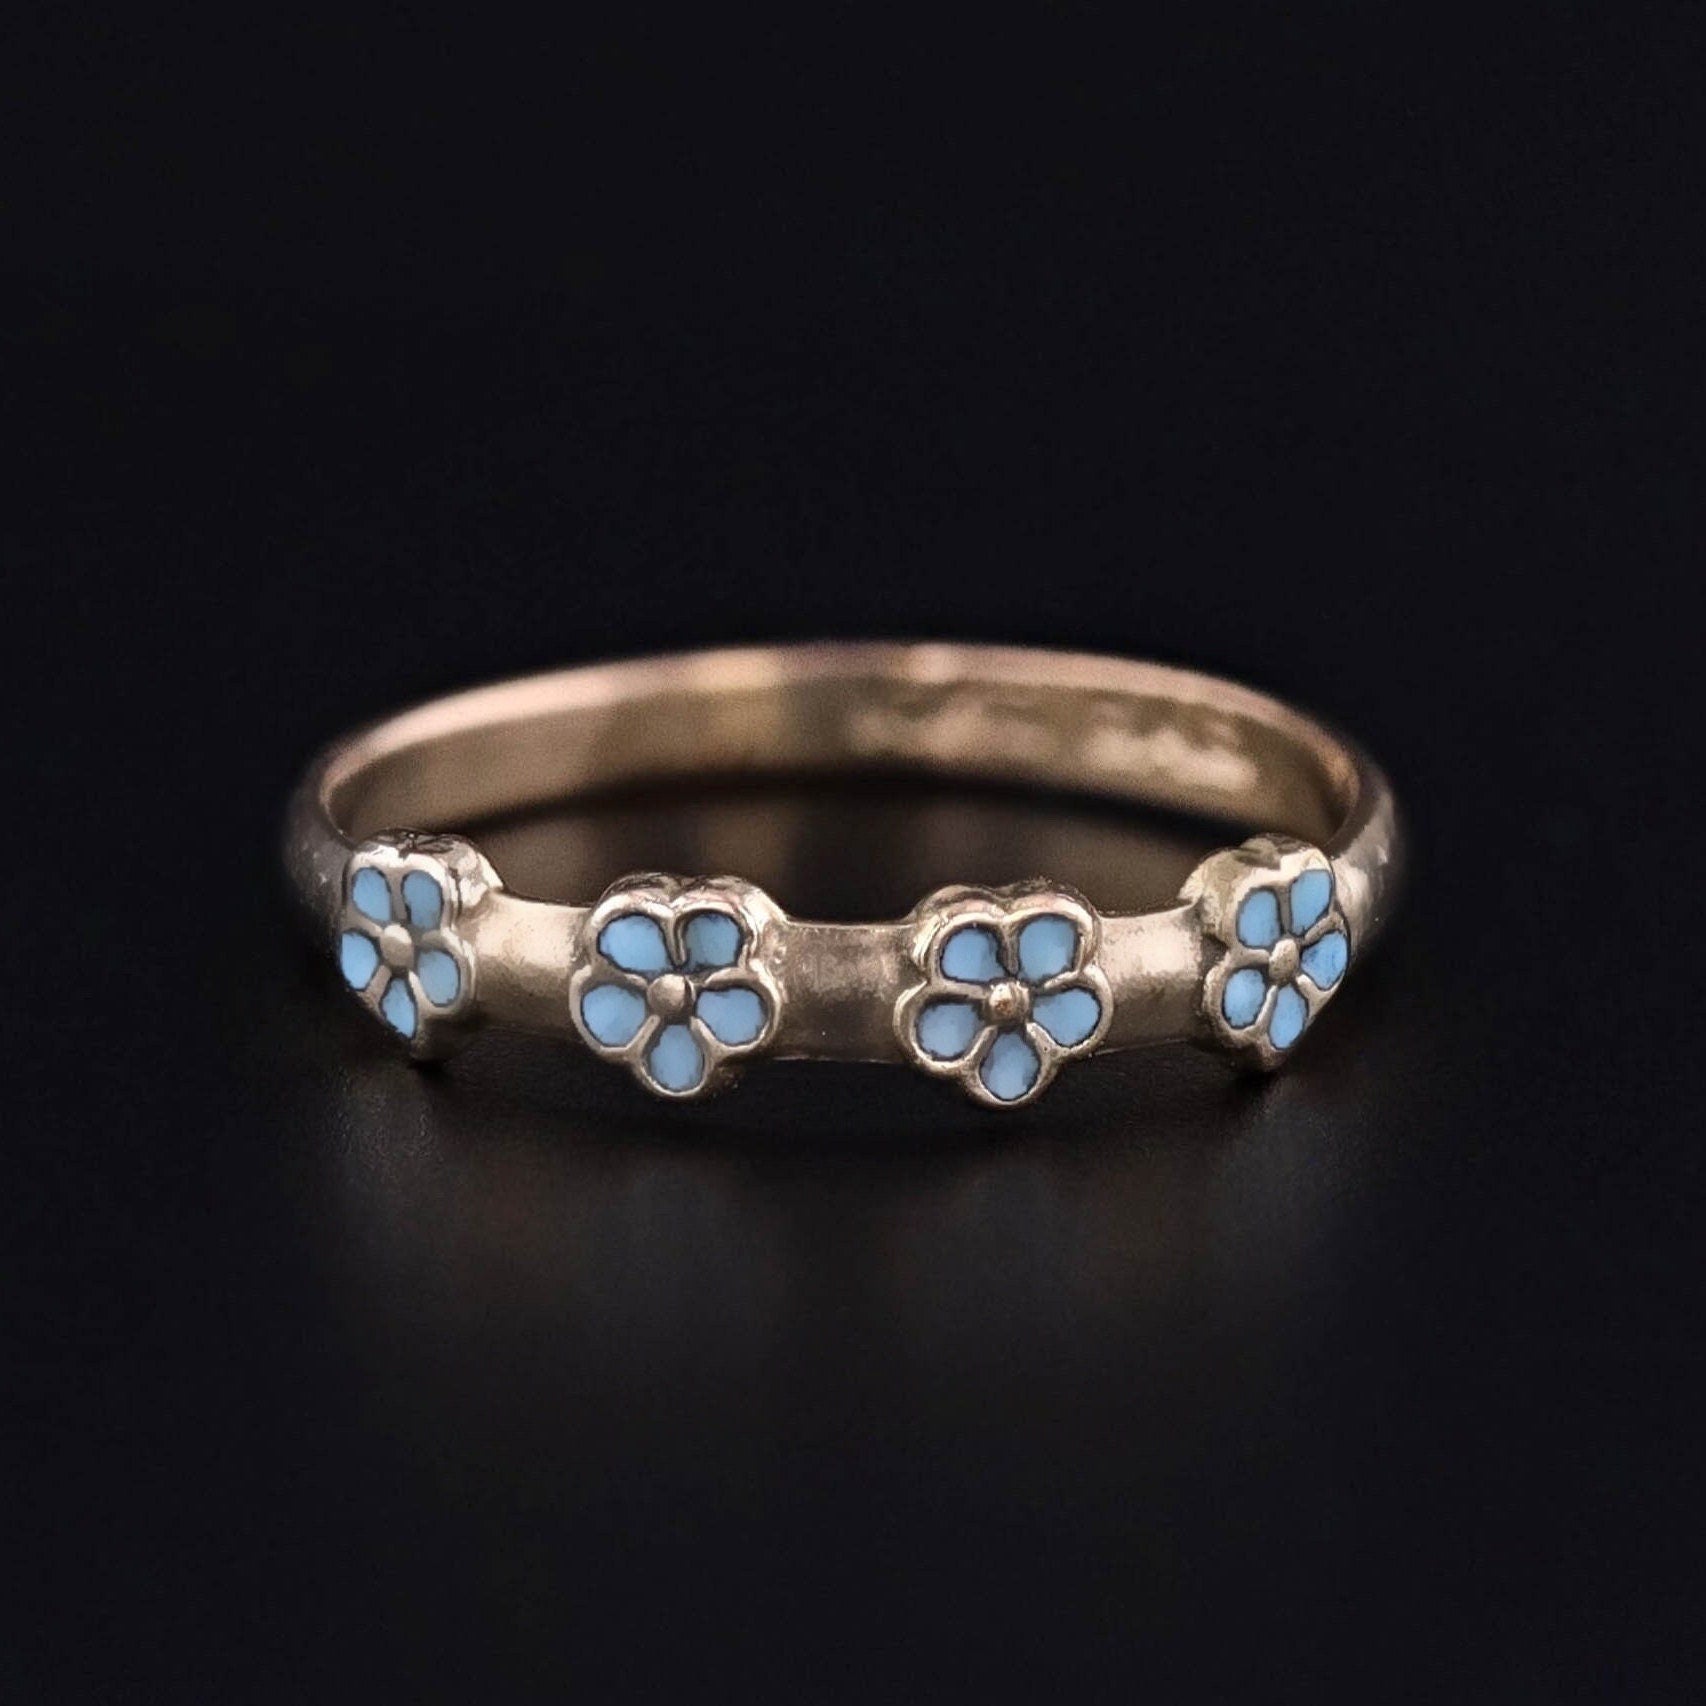 Antique Forget-Me-Not Ring of 10k Gold